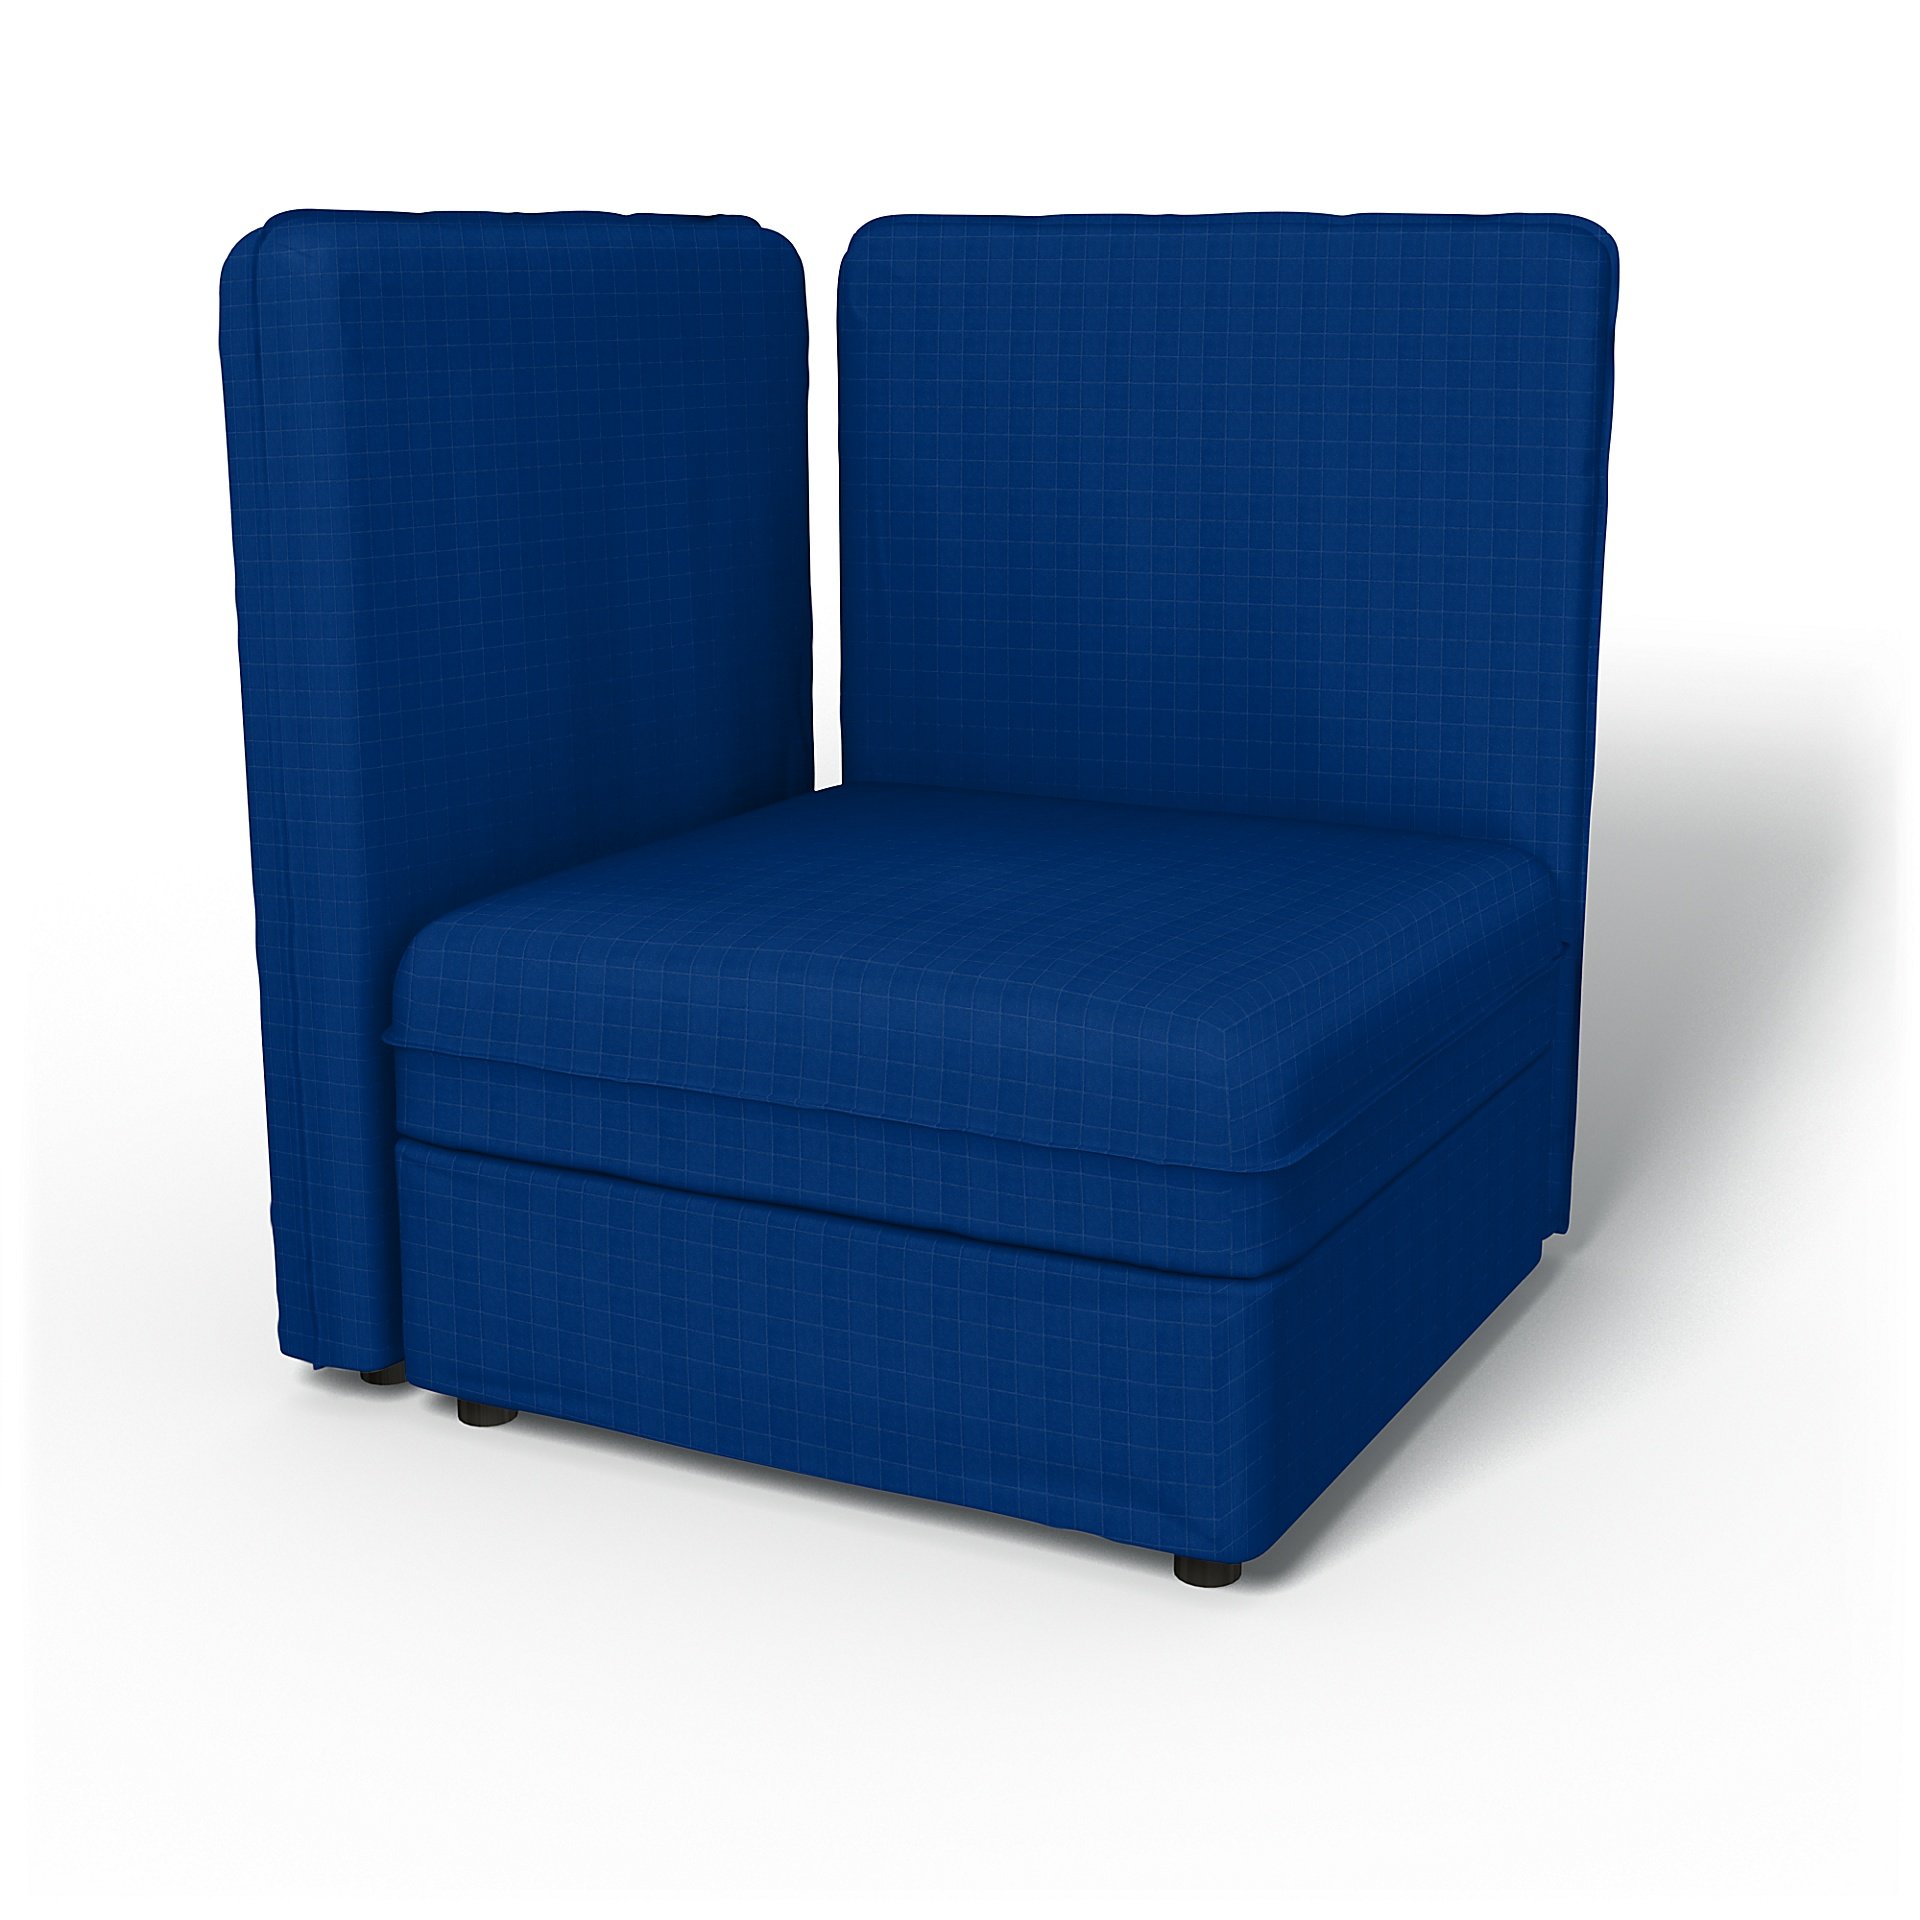 IKEA - Vallentuna Corner Seat Module with High Back and Storage Cover 80x80 32x32in, Lapis Blue, Vel